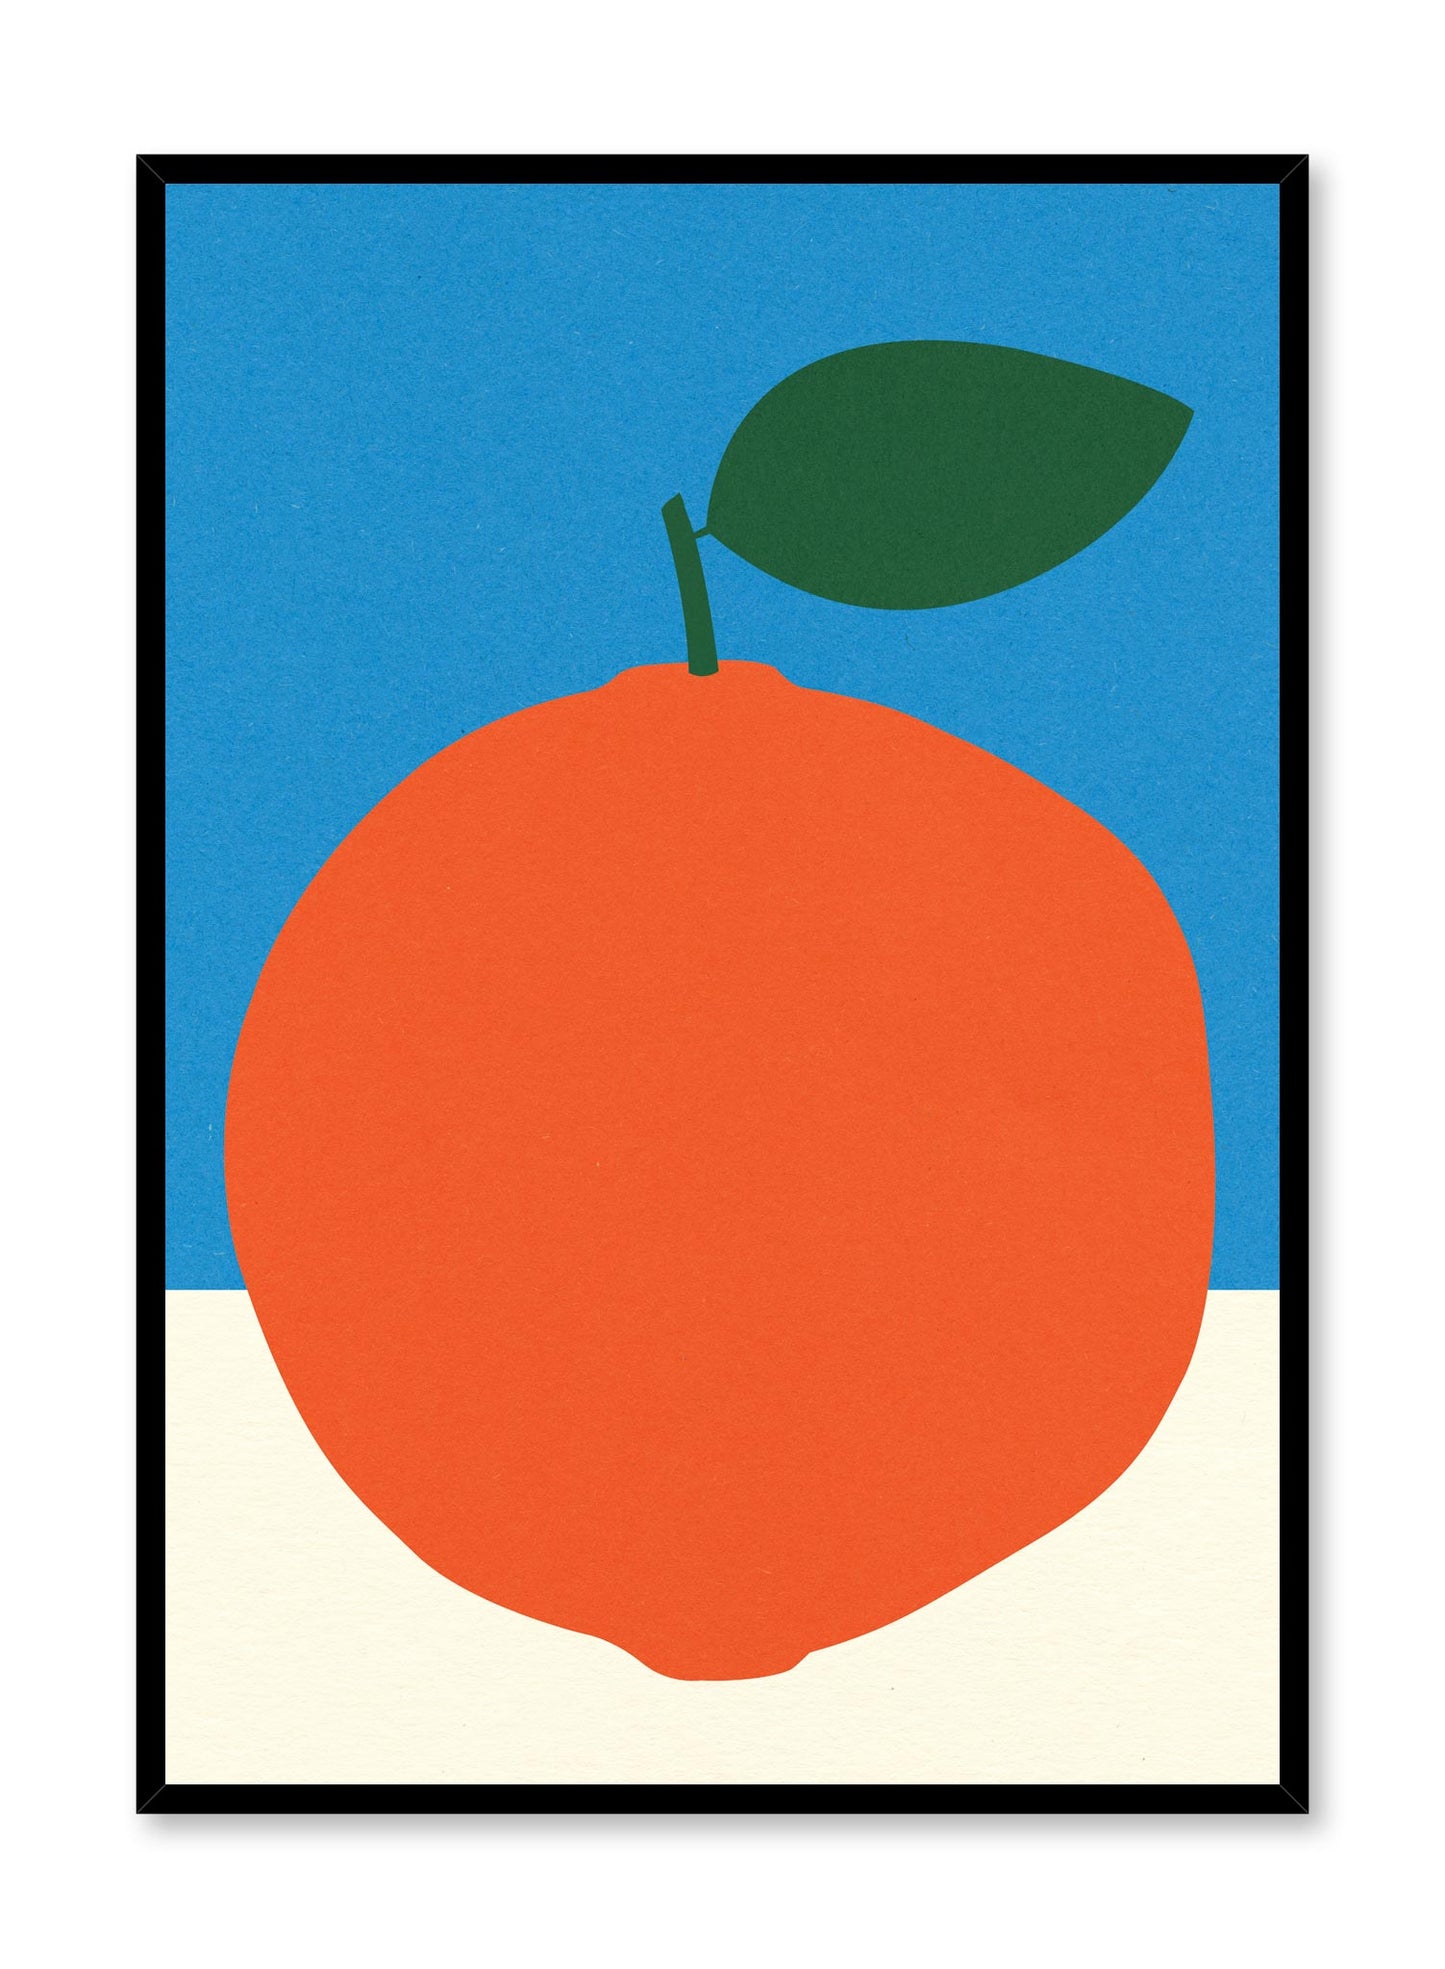 Modern minimalist poster by Opposite Wall with abstract collage illustration of orange